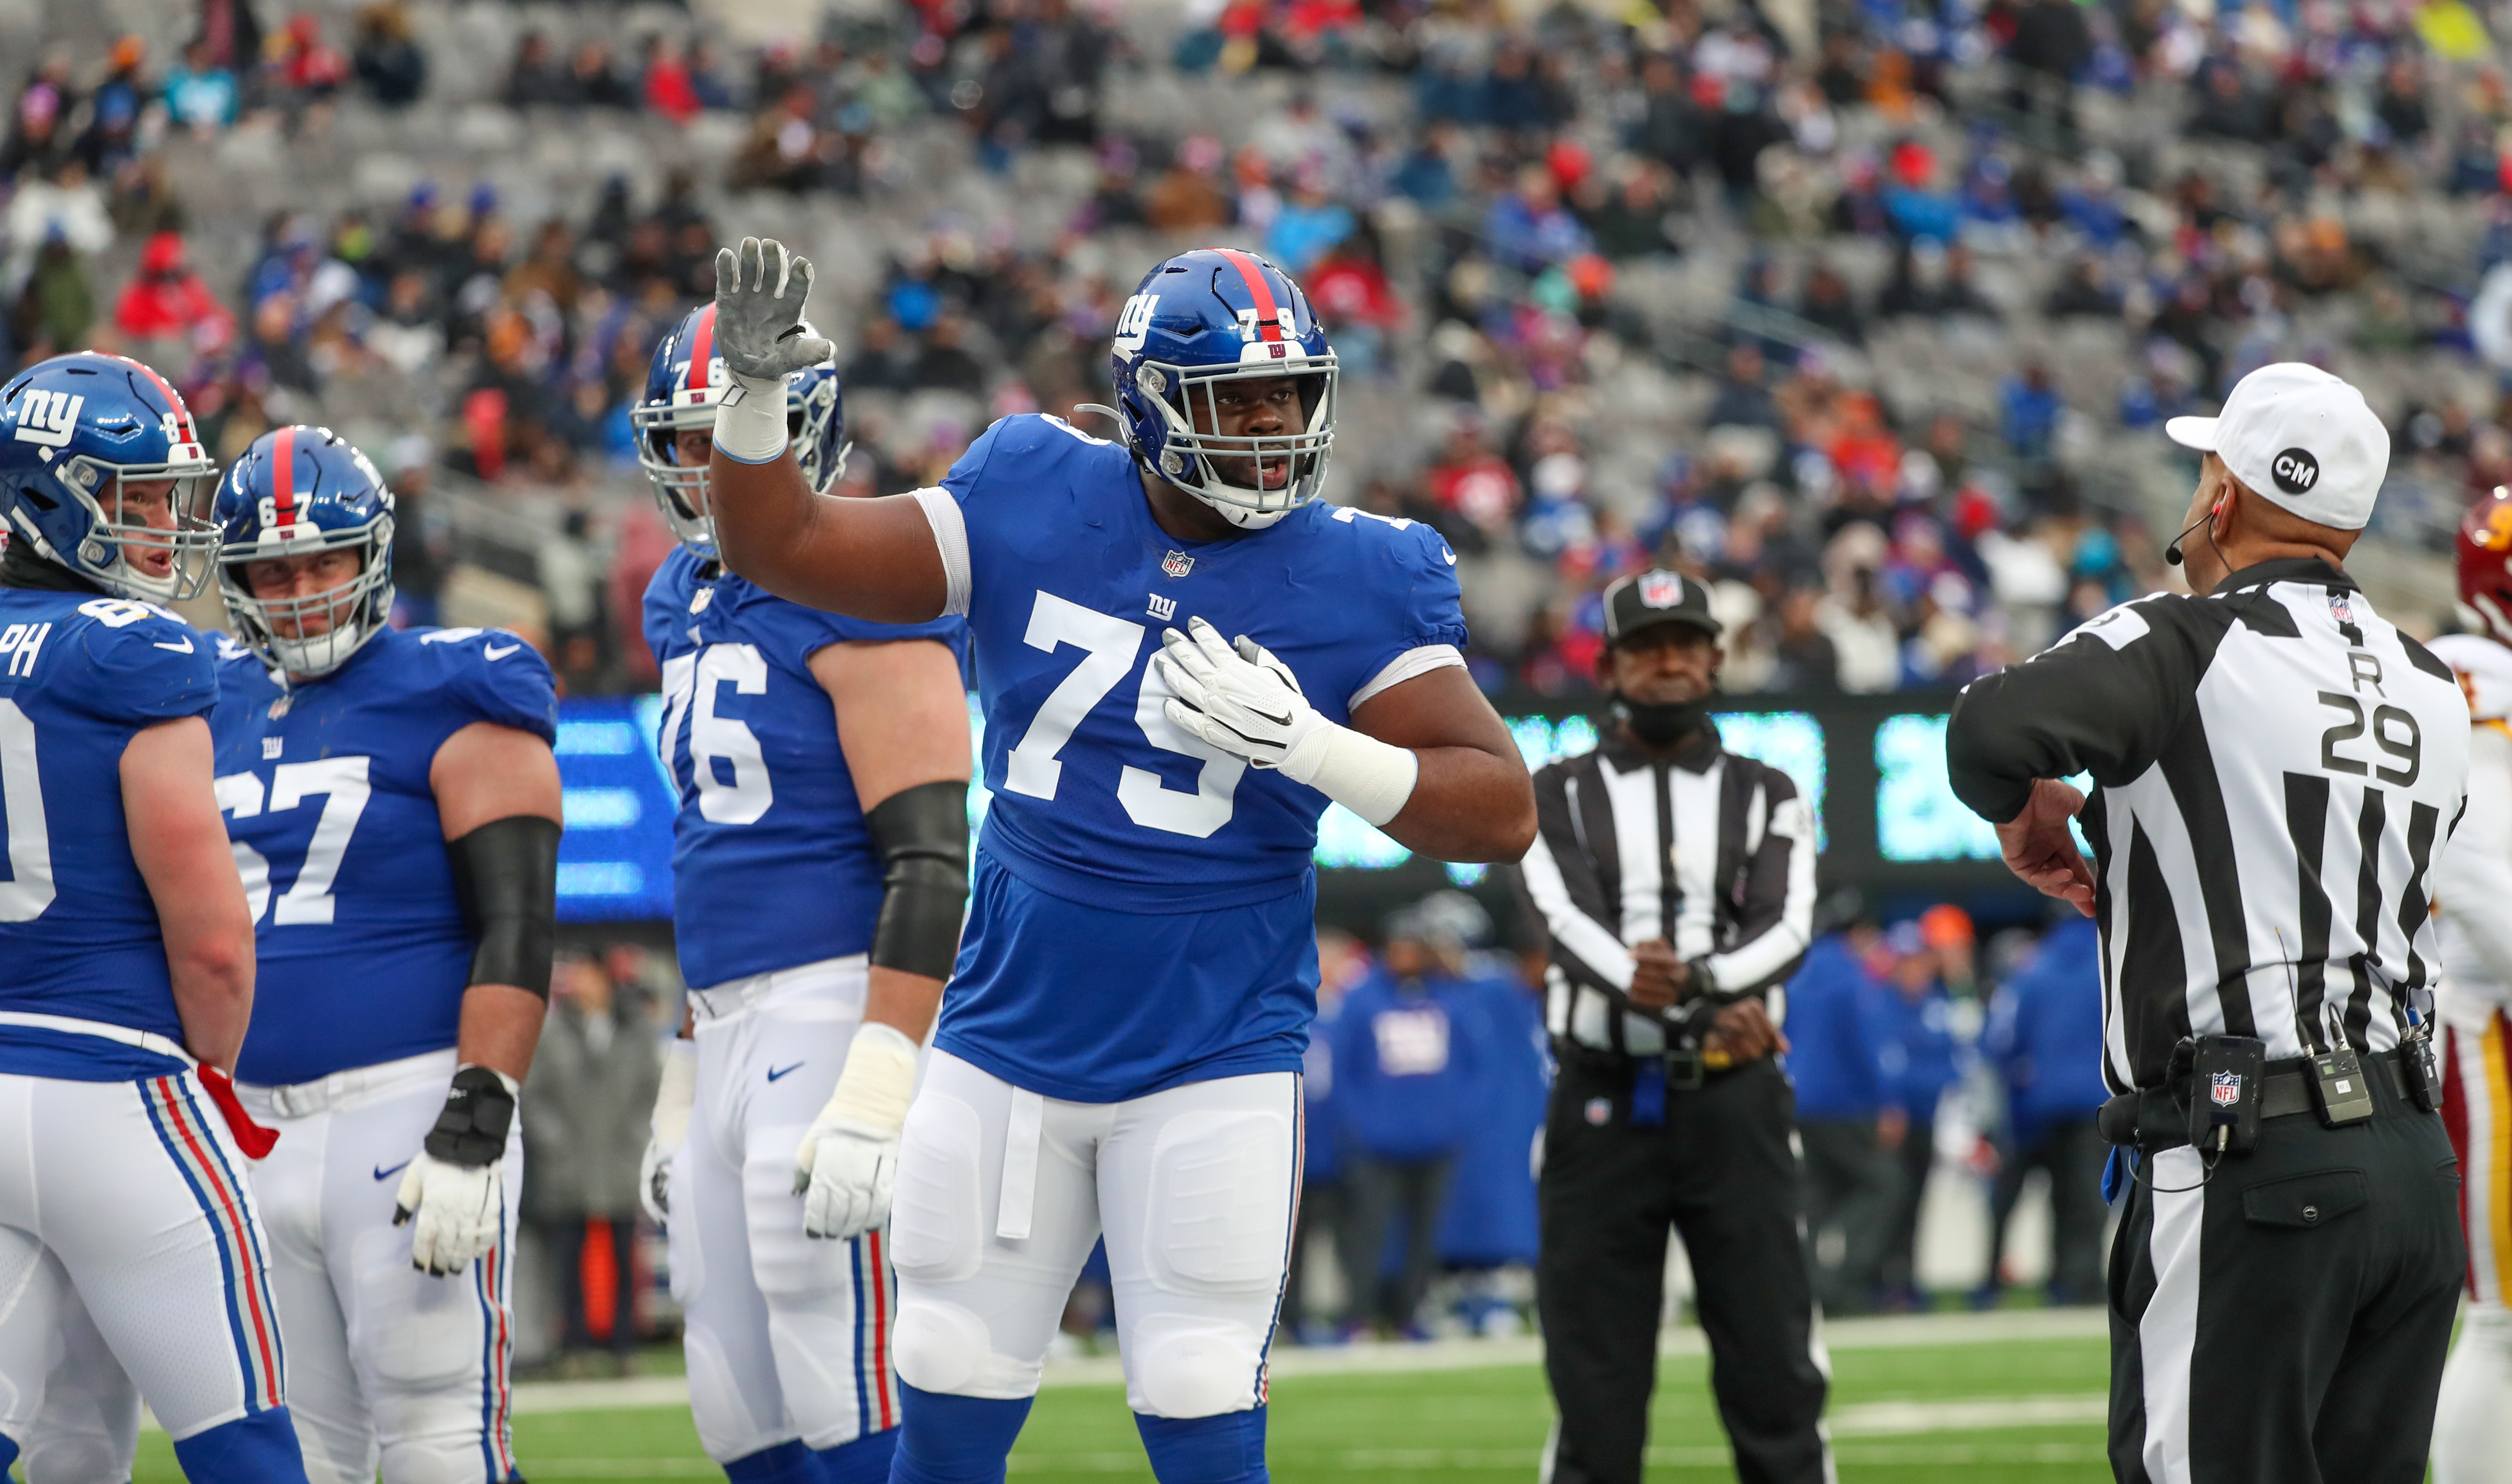 New York Giants offensive tackle Korey Cunningham (79) checks in with the official to be an eligible receiver during the second quarter against the Washington Football Team on Sunday, Jan. 9, 2022 in East Rutherford, N.J. Washington won, 22-7.